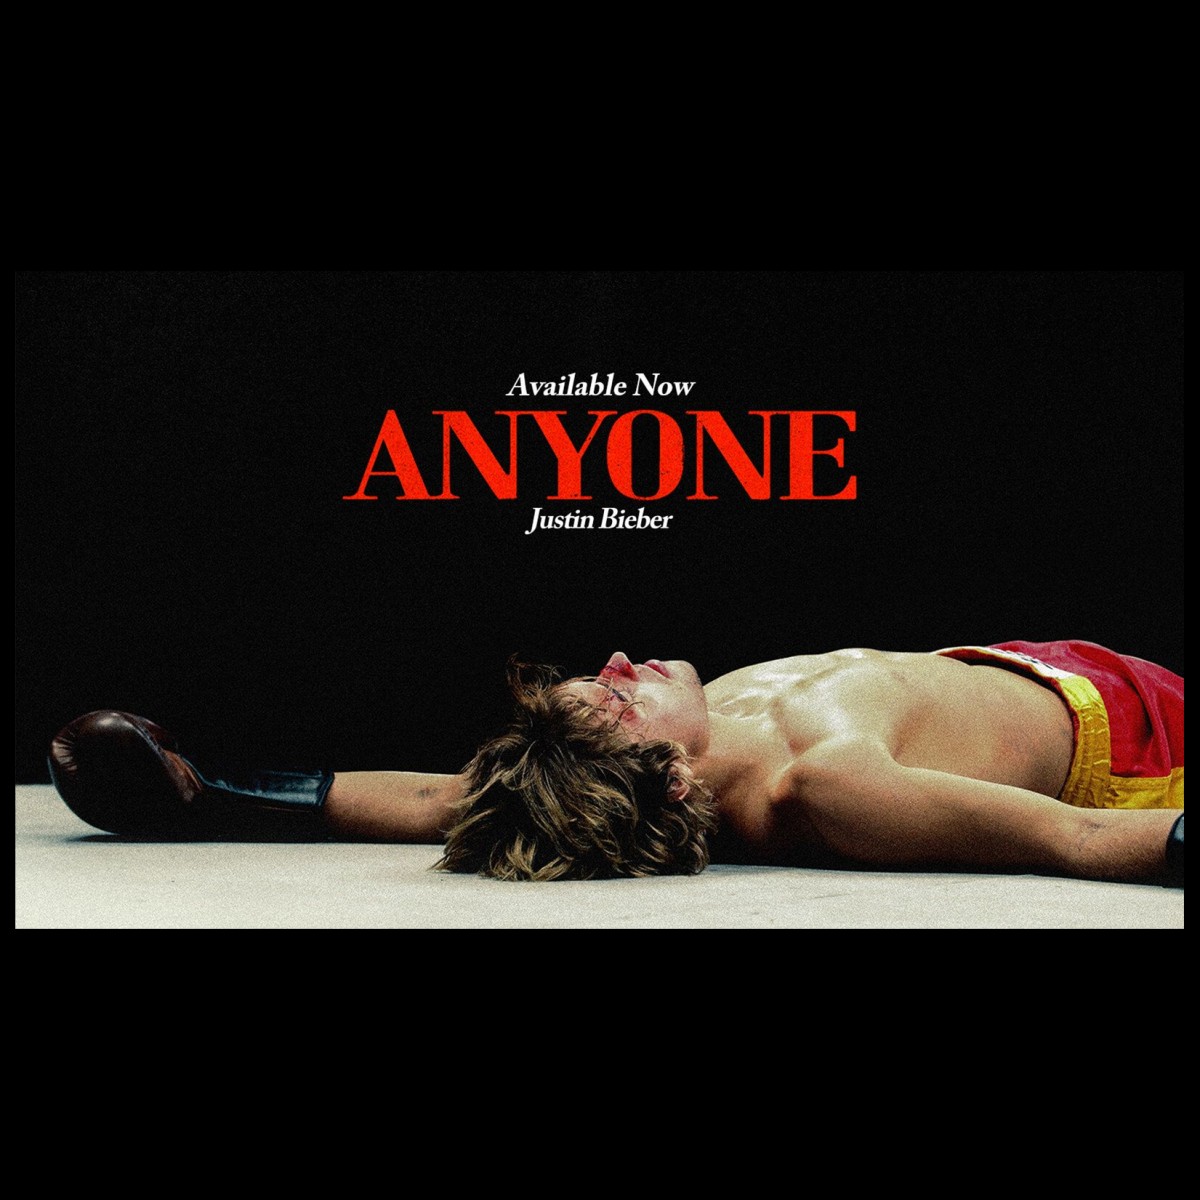 Justin Bieber Announces New Single + Video “Anyone” Arriving New Year’s Day  